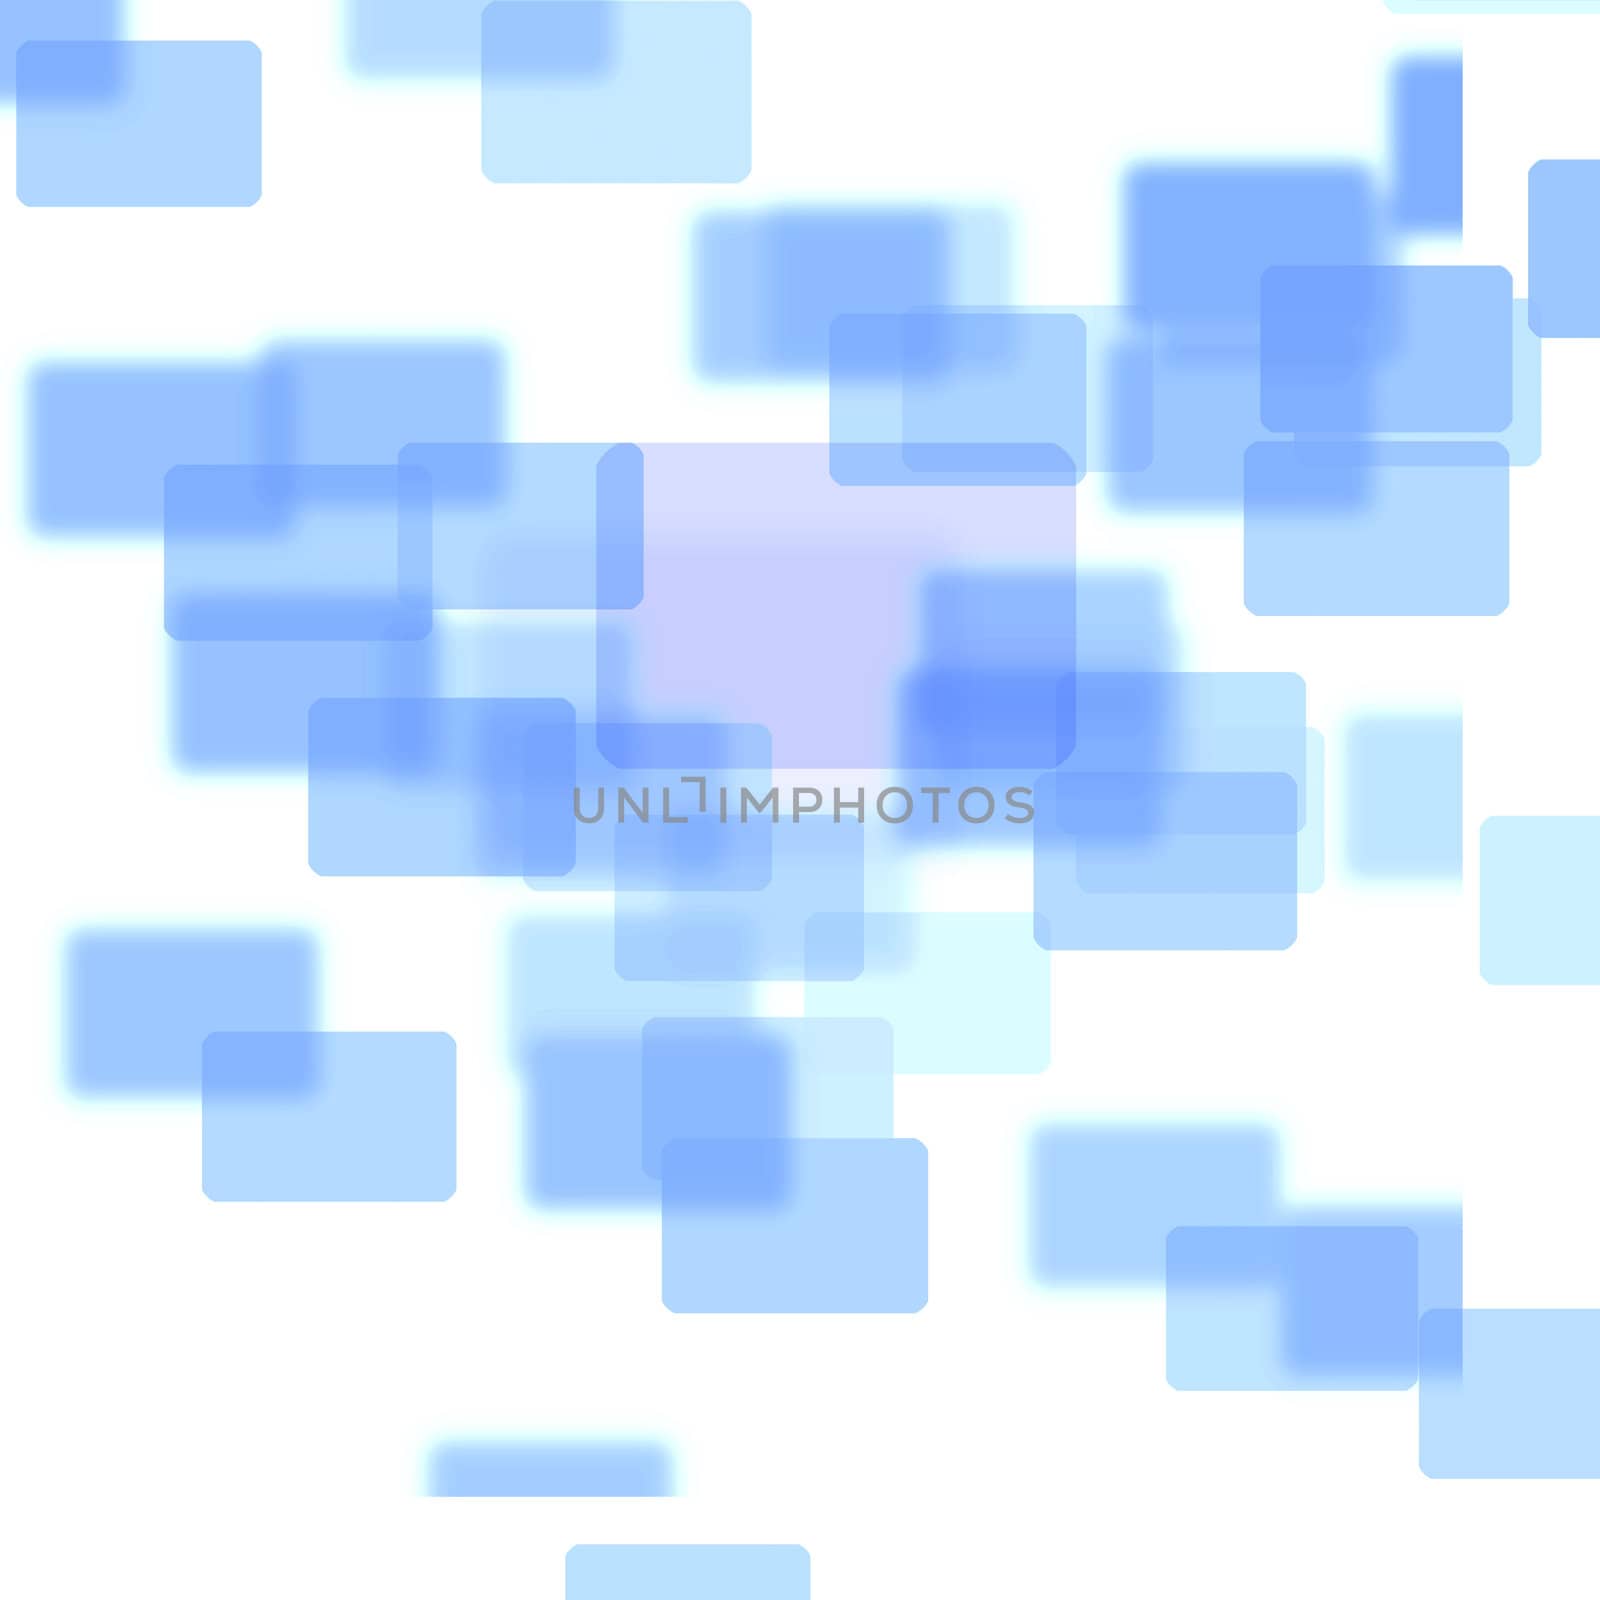 Blue squares melding together against a white background